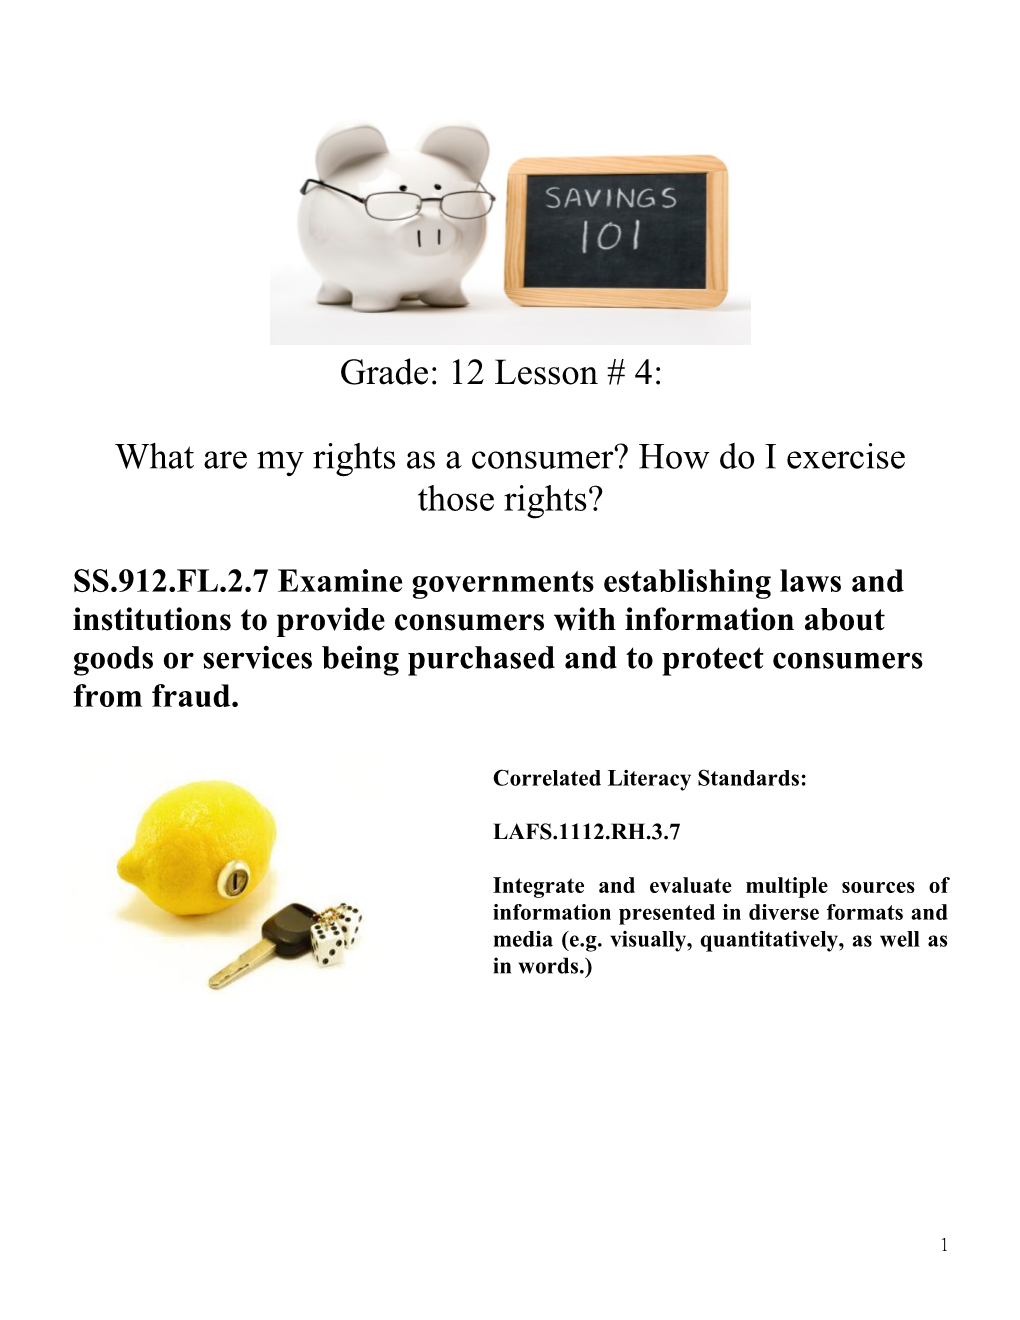 What Are My Rights As a Consumer? How Do I Exercise Those Rights?